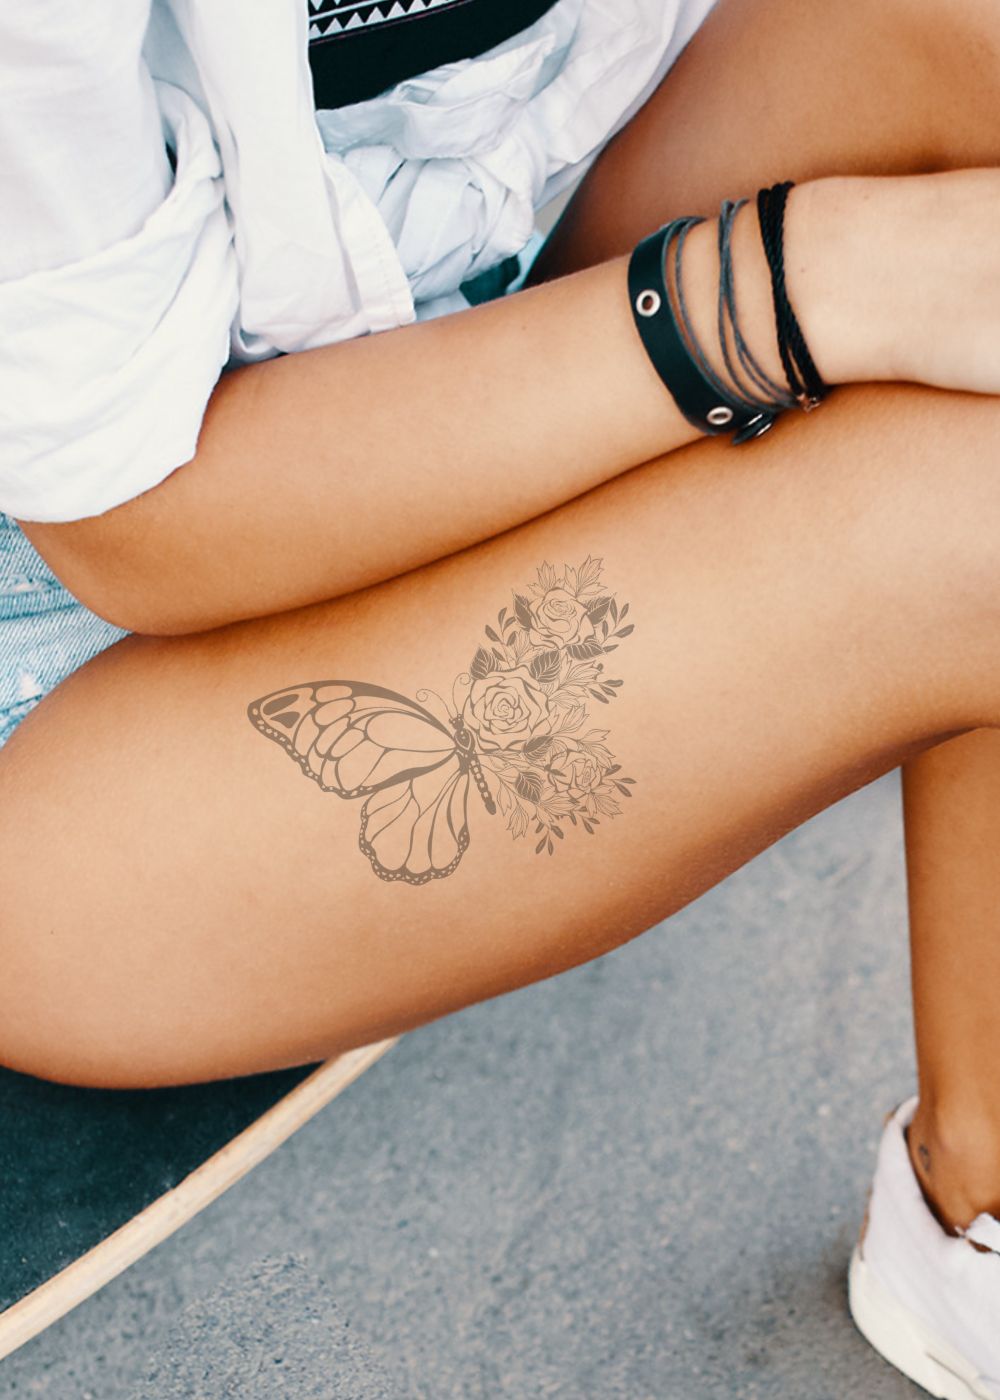 A woman with a butterfly tattoo on her thigh.